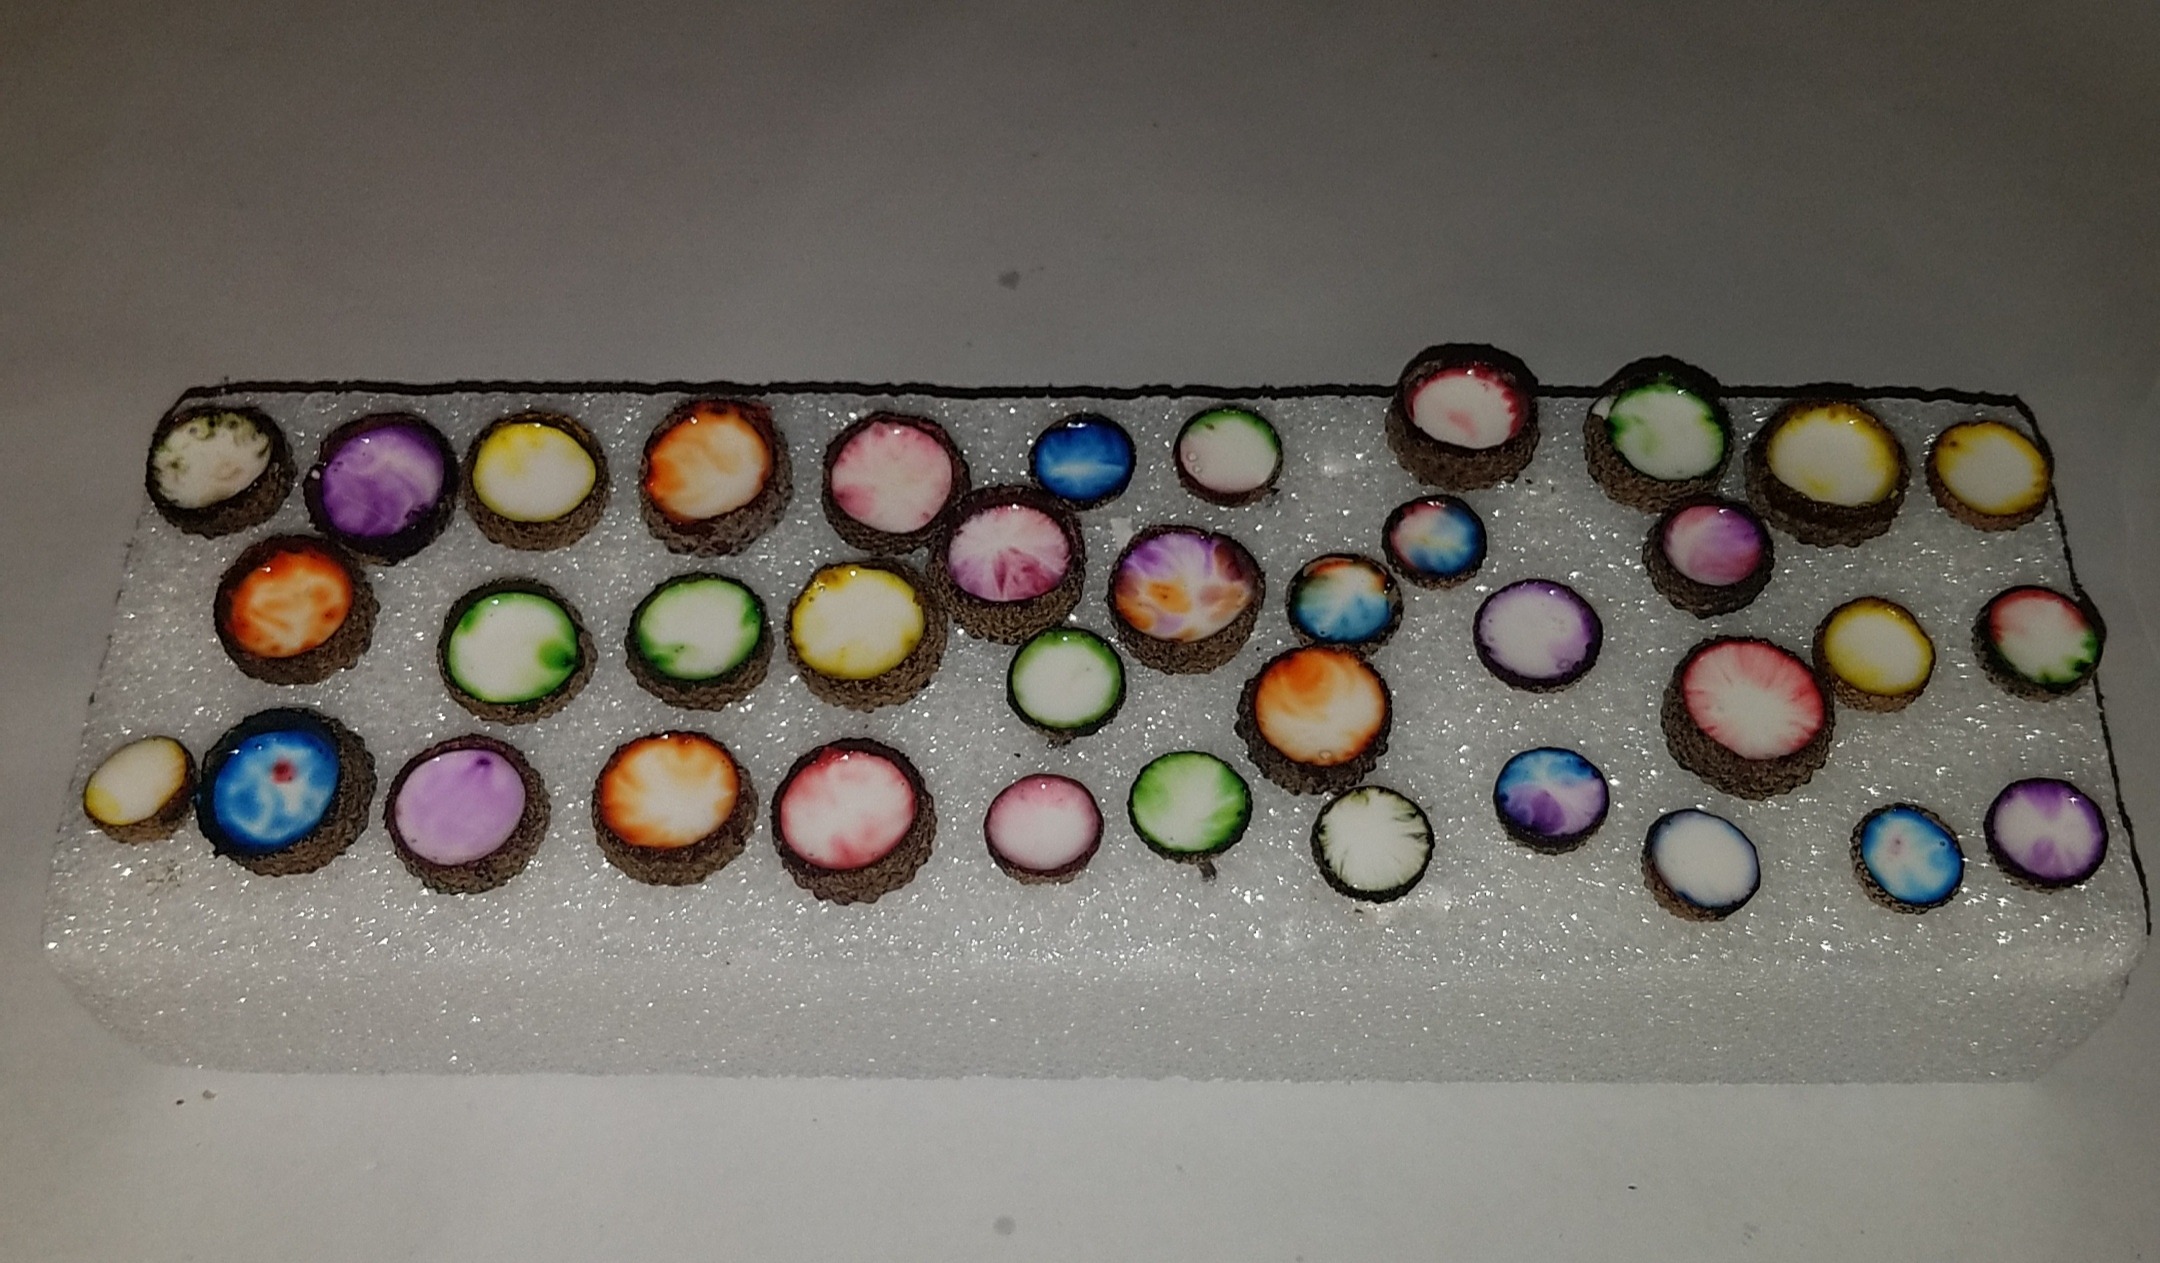 Colored acorn caps filled with glue turning different colors